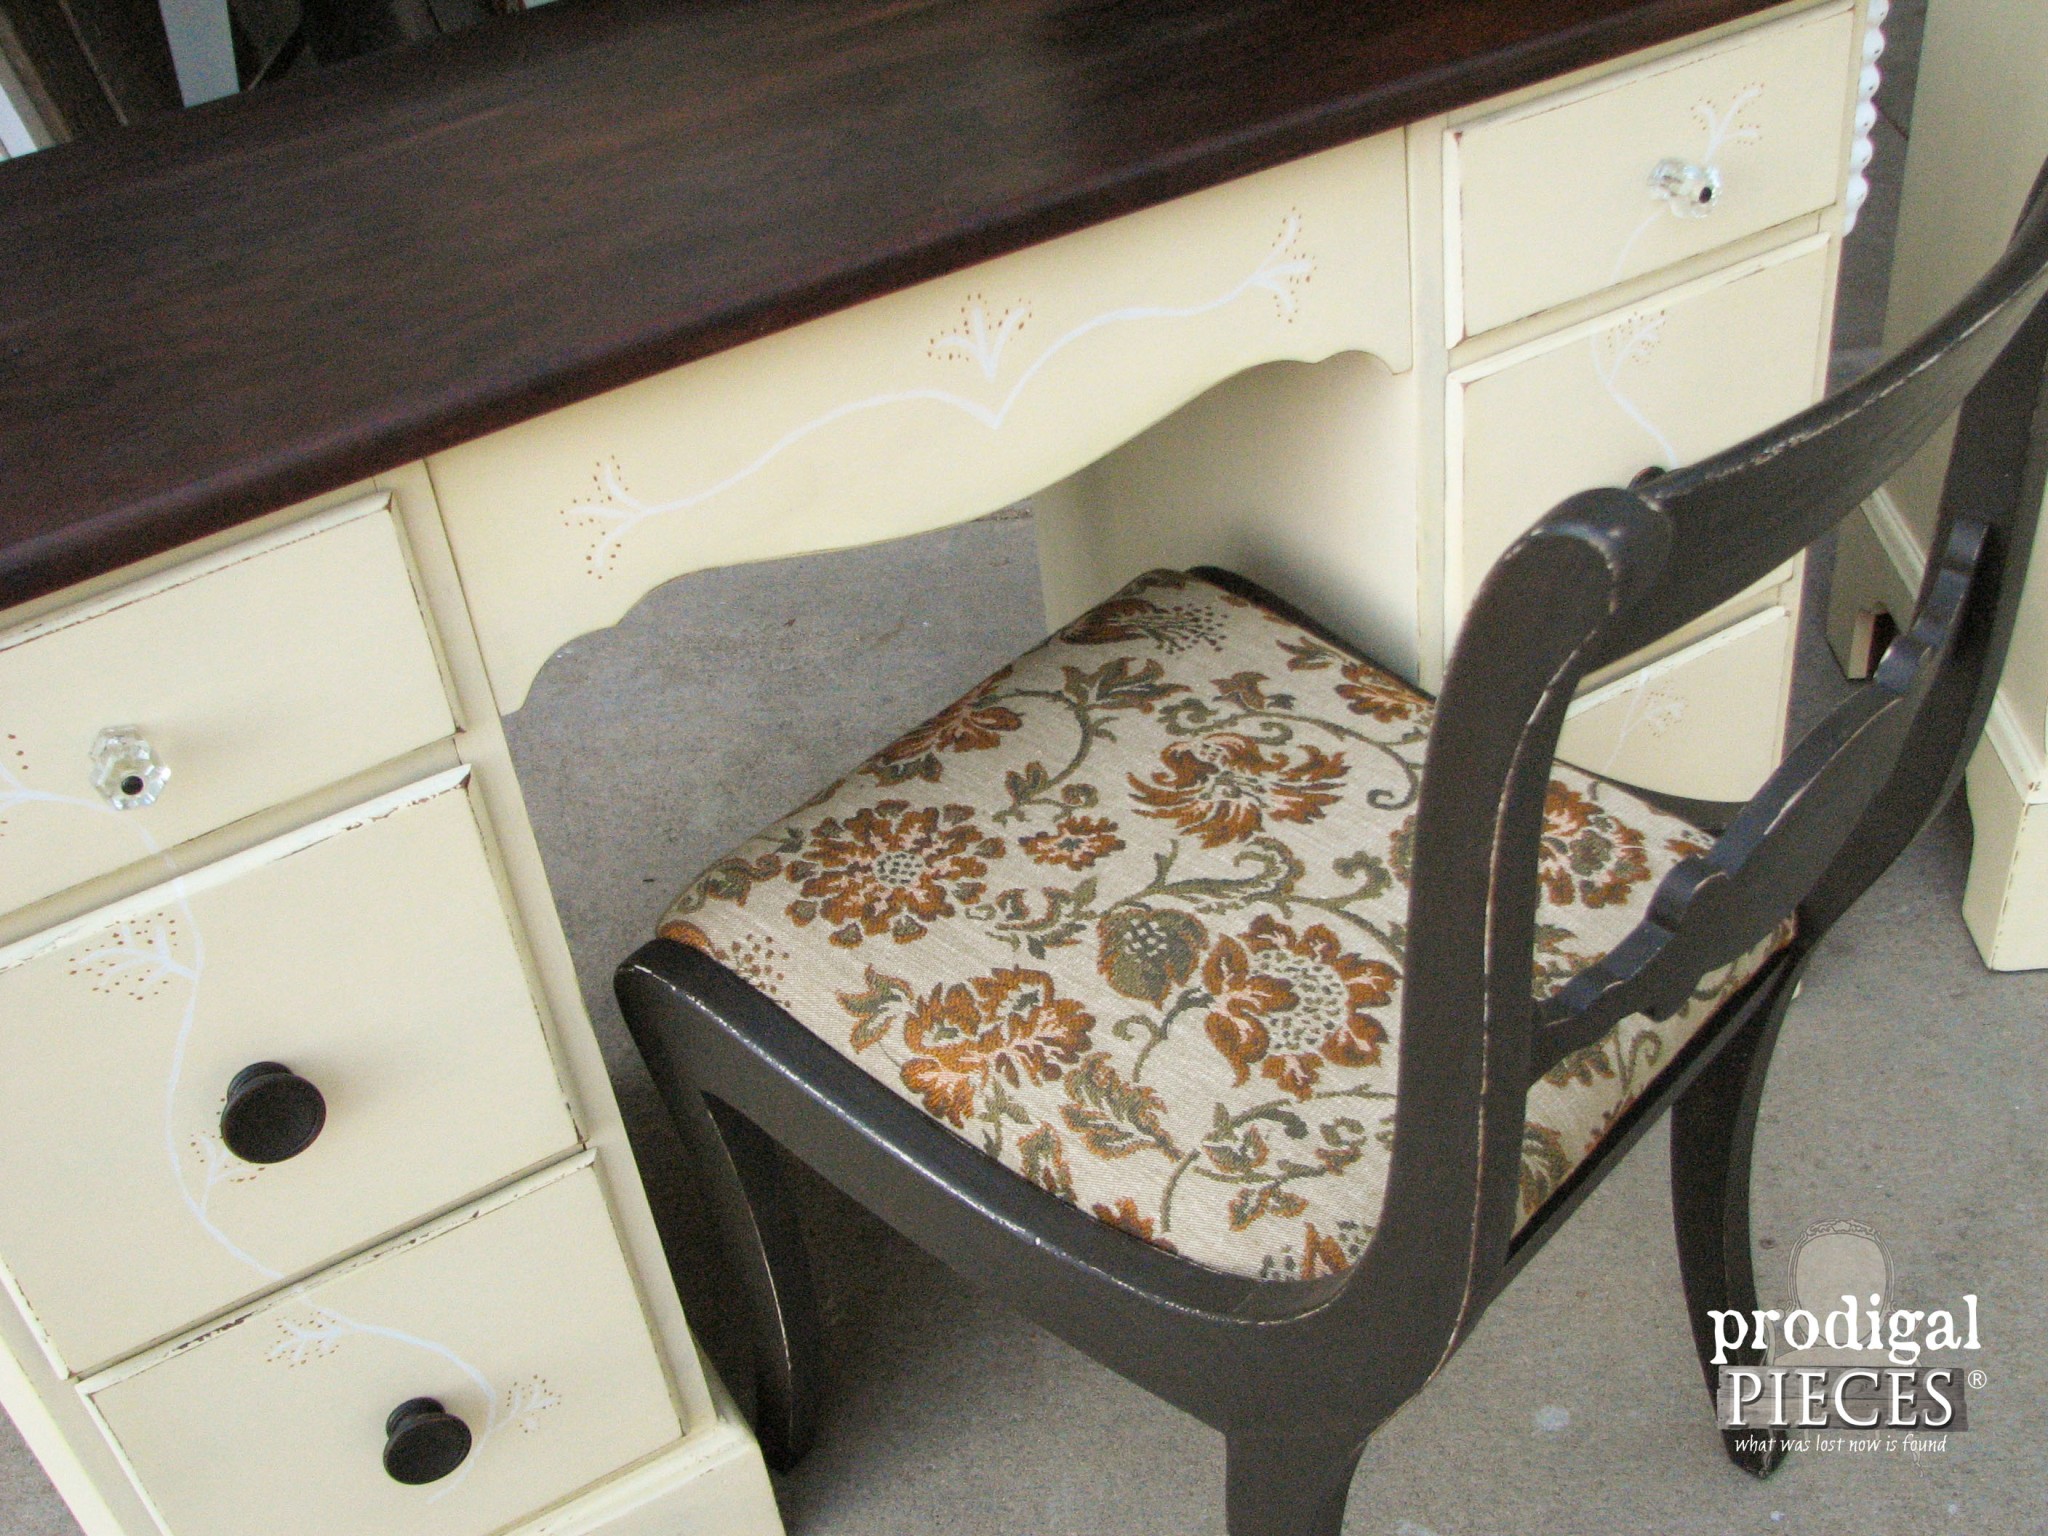 Upholstered Vintage Vanity Chair by Prodigal Pieces | www.prodigalpieces.com